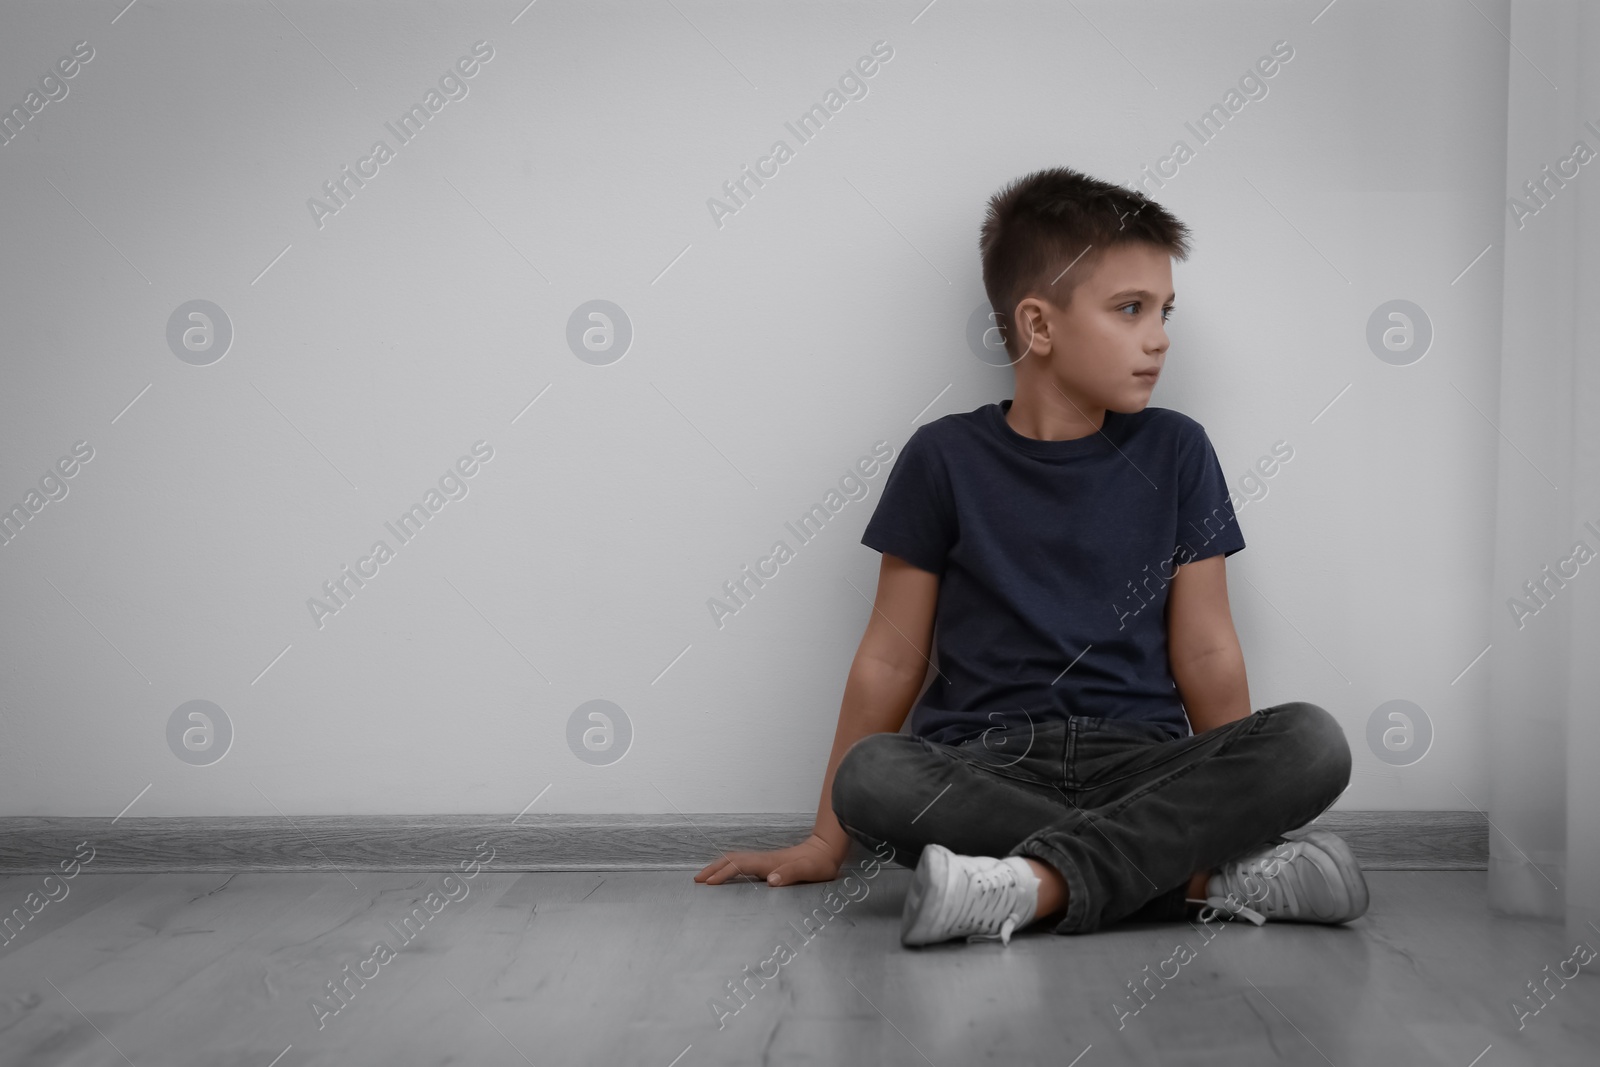 Photo of Sad little boy sitting on floor indoors, space for text. Child in danger